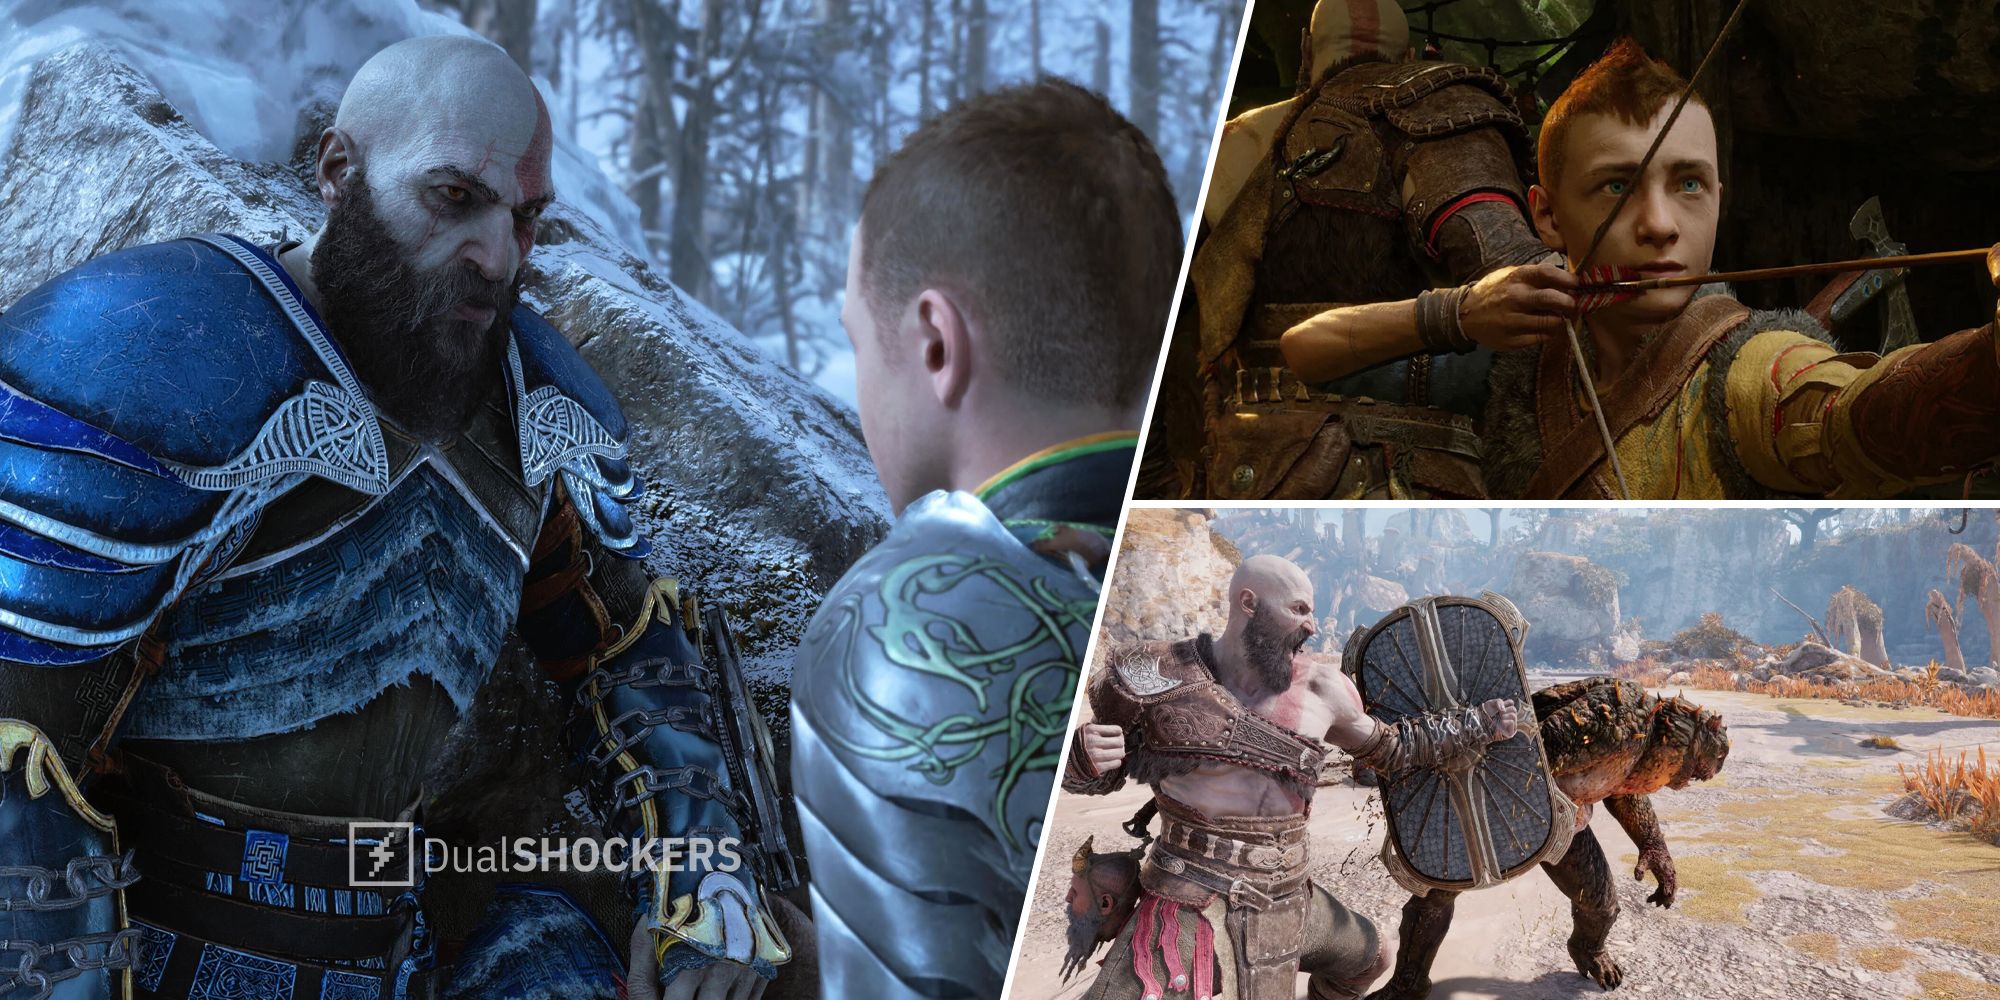 Metacritic - Game of the Year Nominees at #TheGameAwards : Elden Ring [96]   God of War:  Ragnarok [94]   Xenoblade Chronicles 3 [89